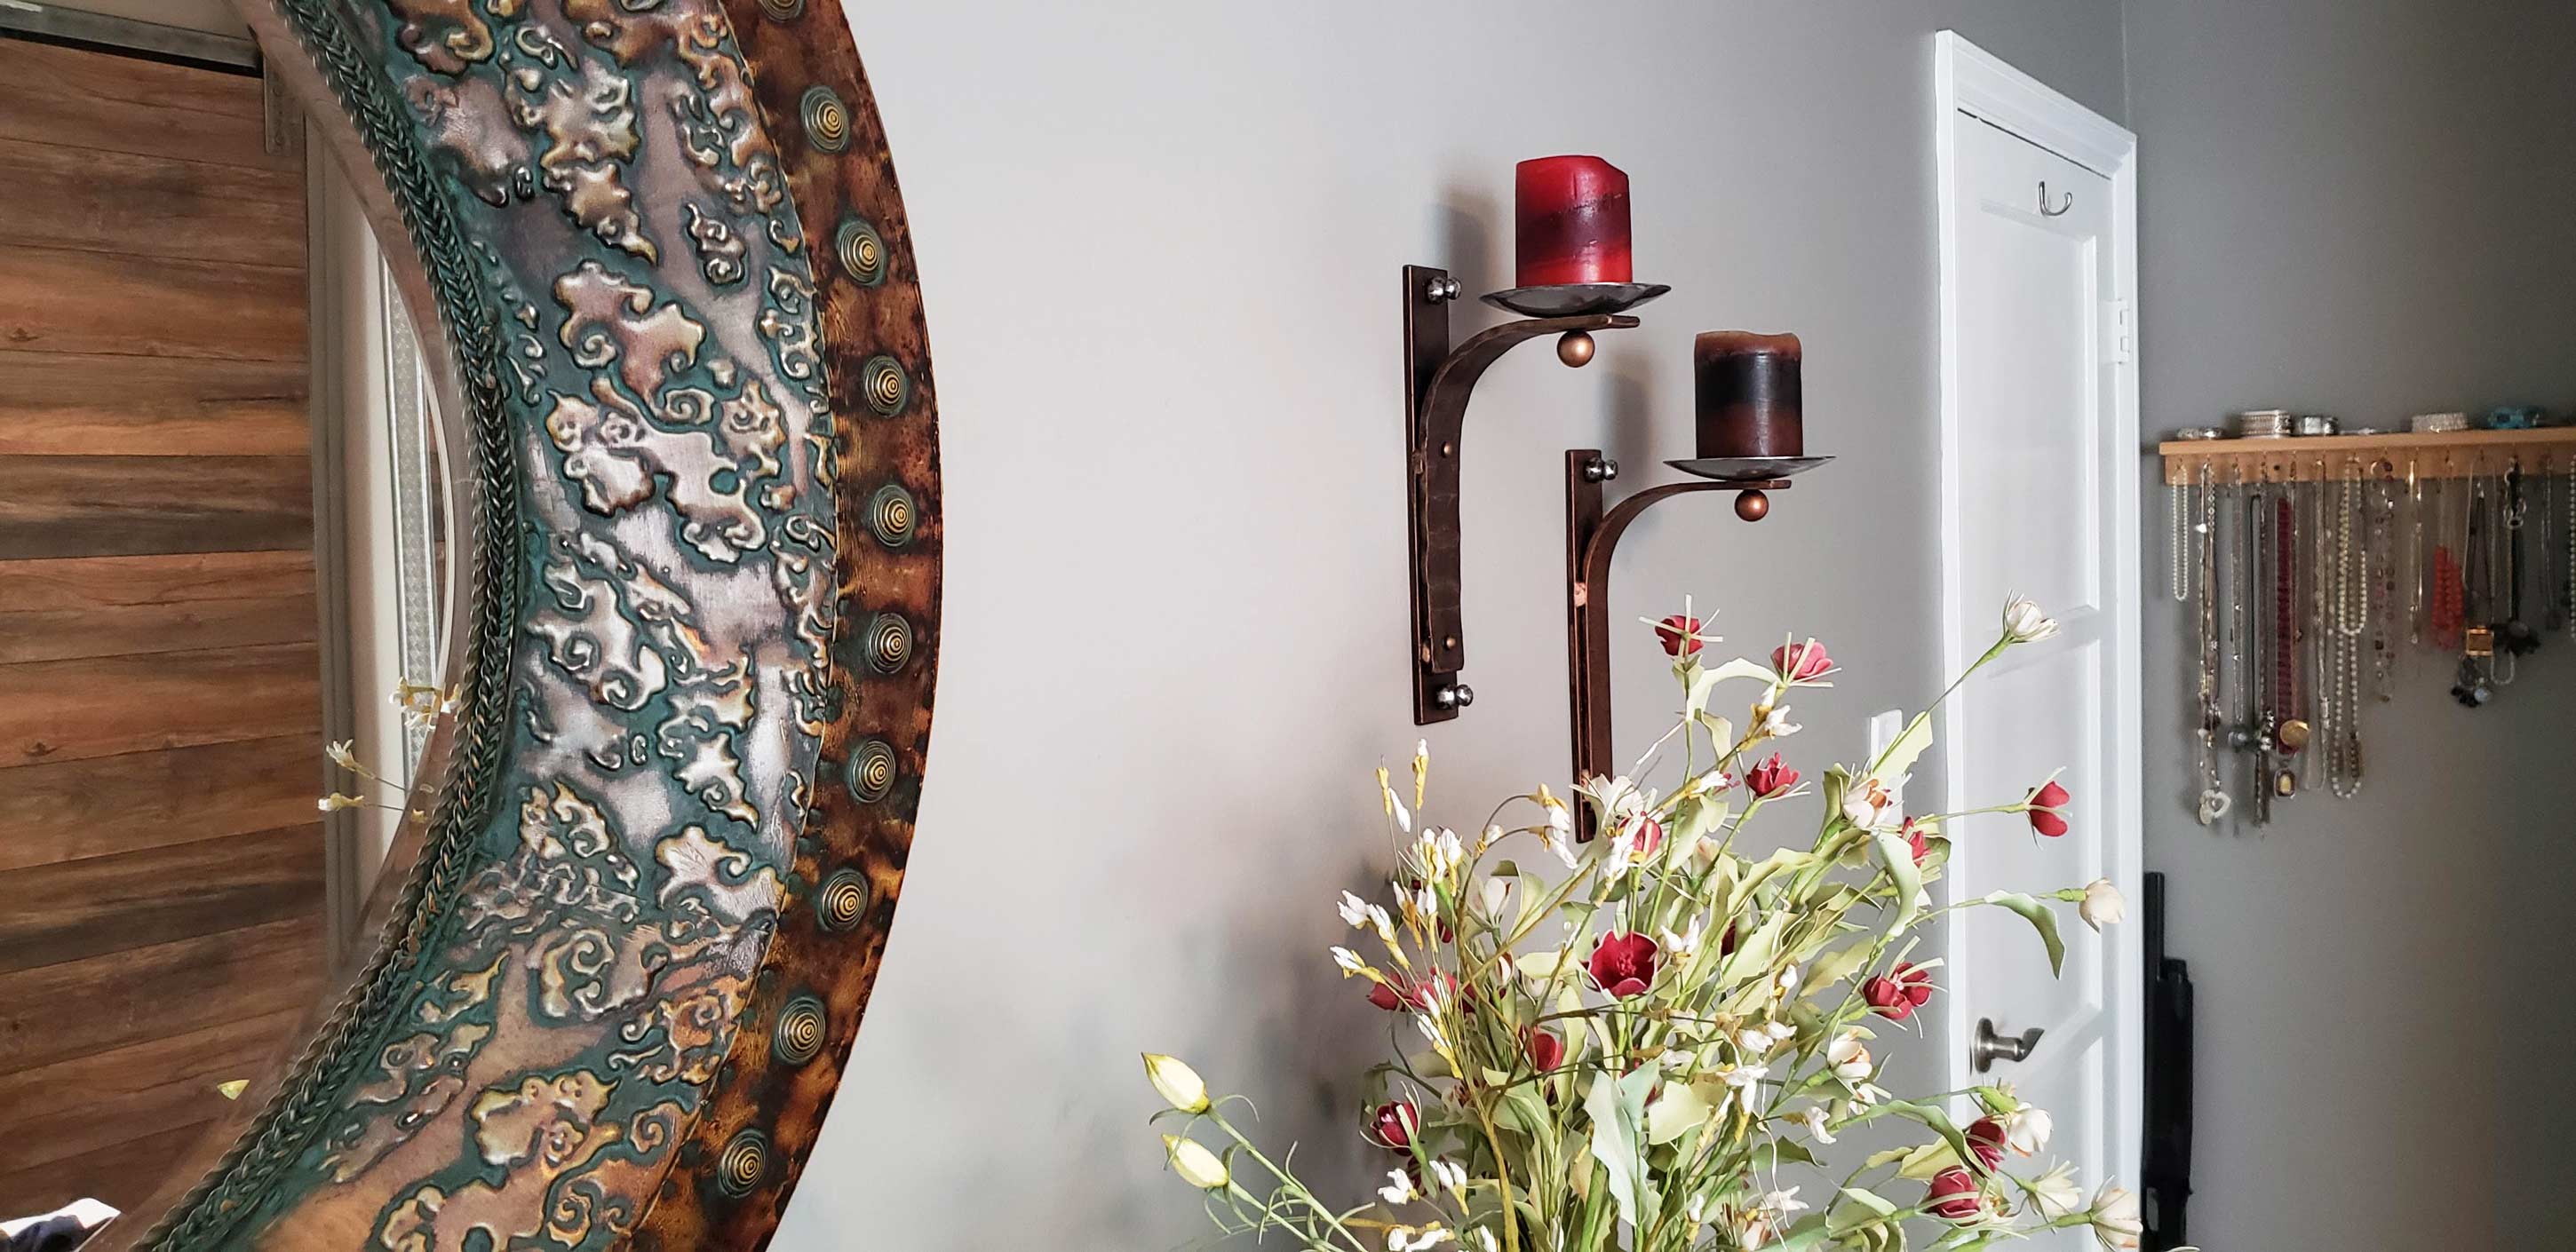 wrought iron wall candle sconce